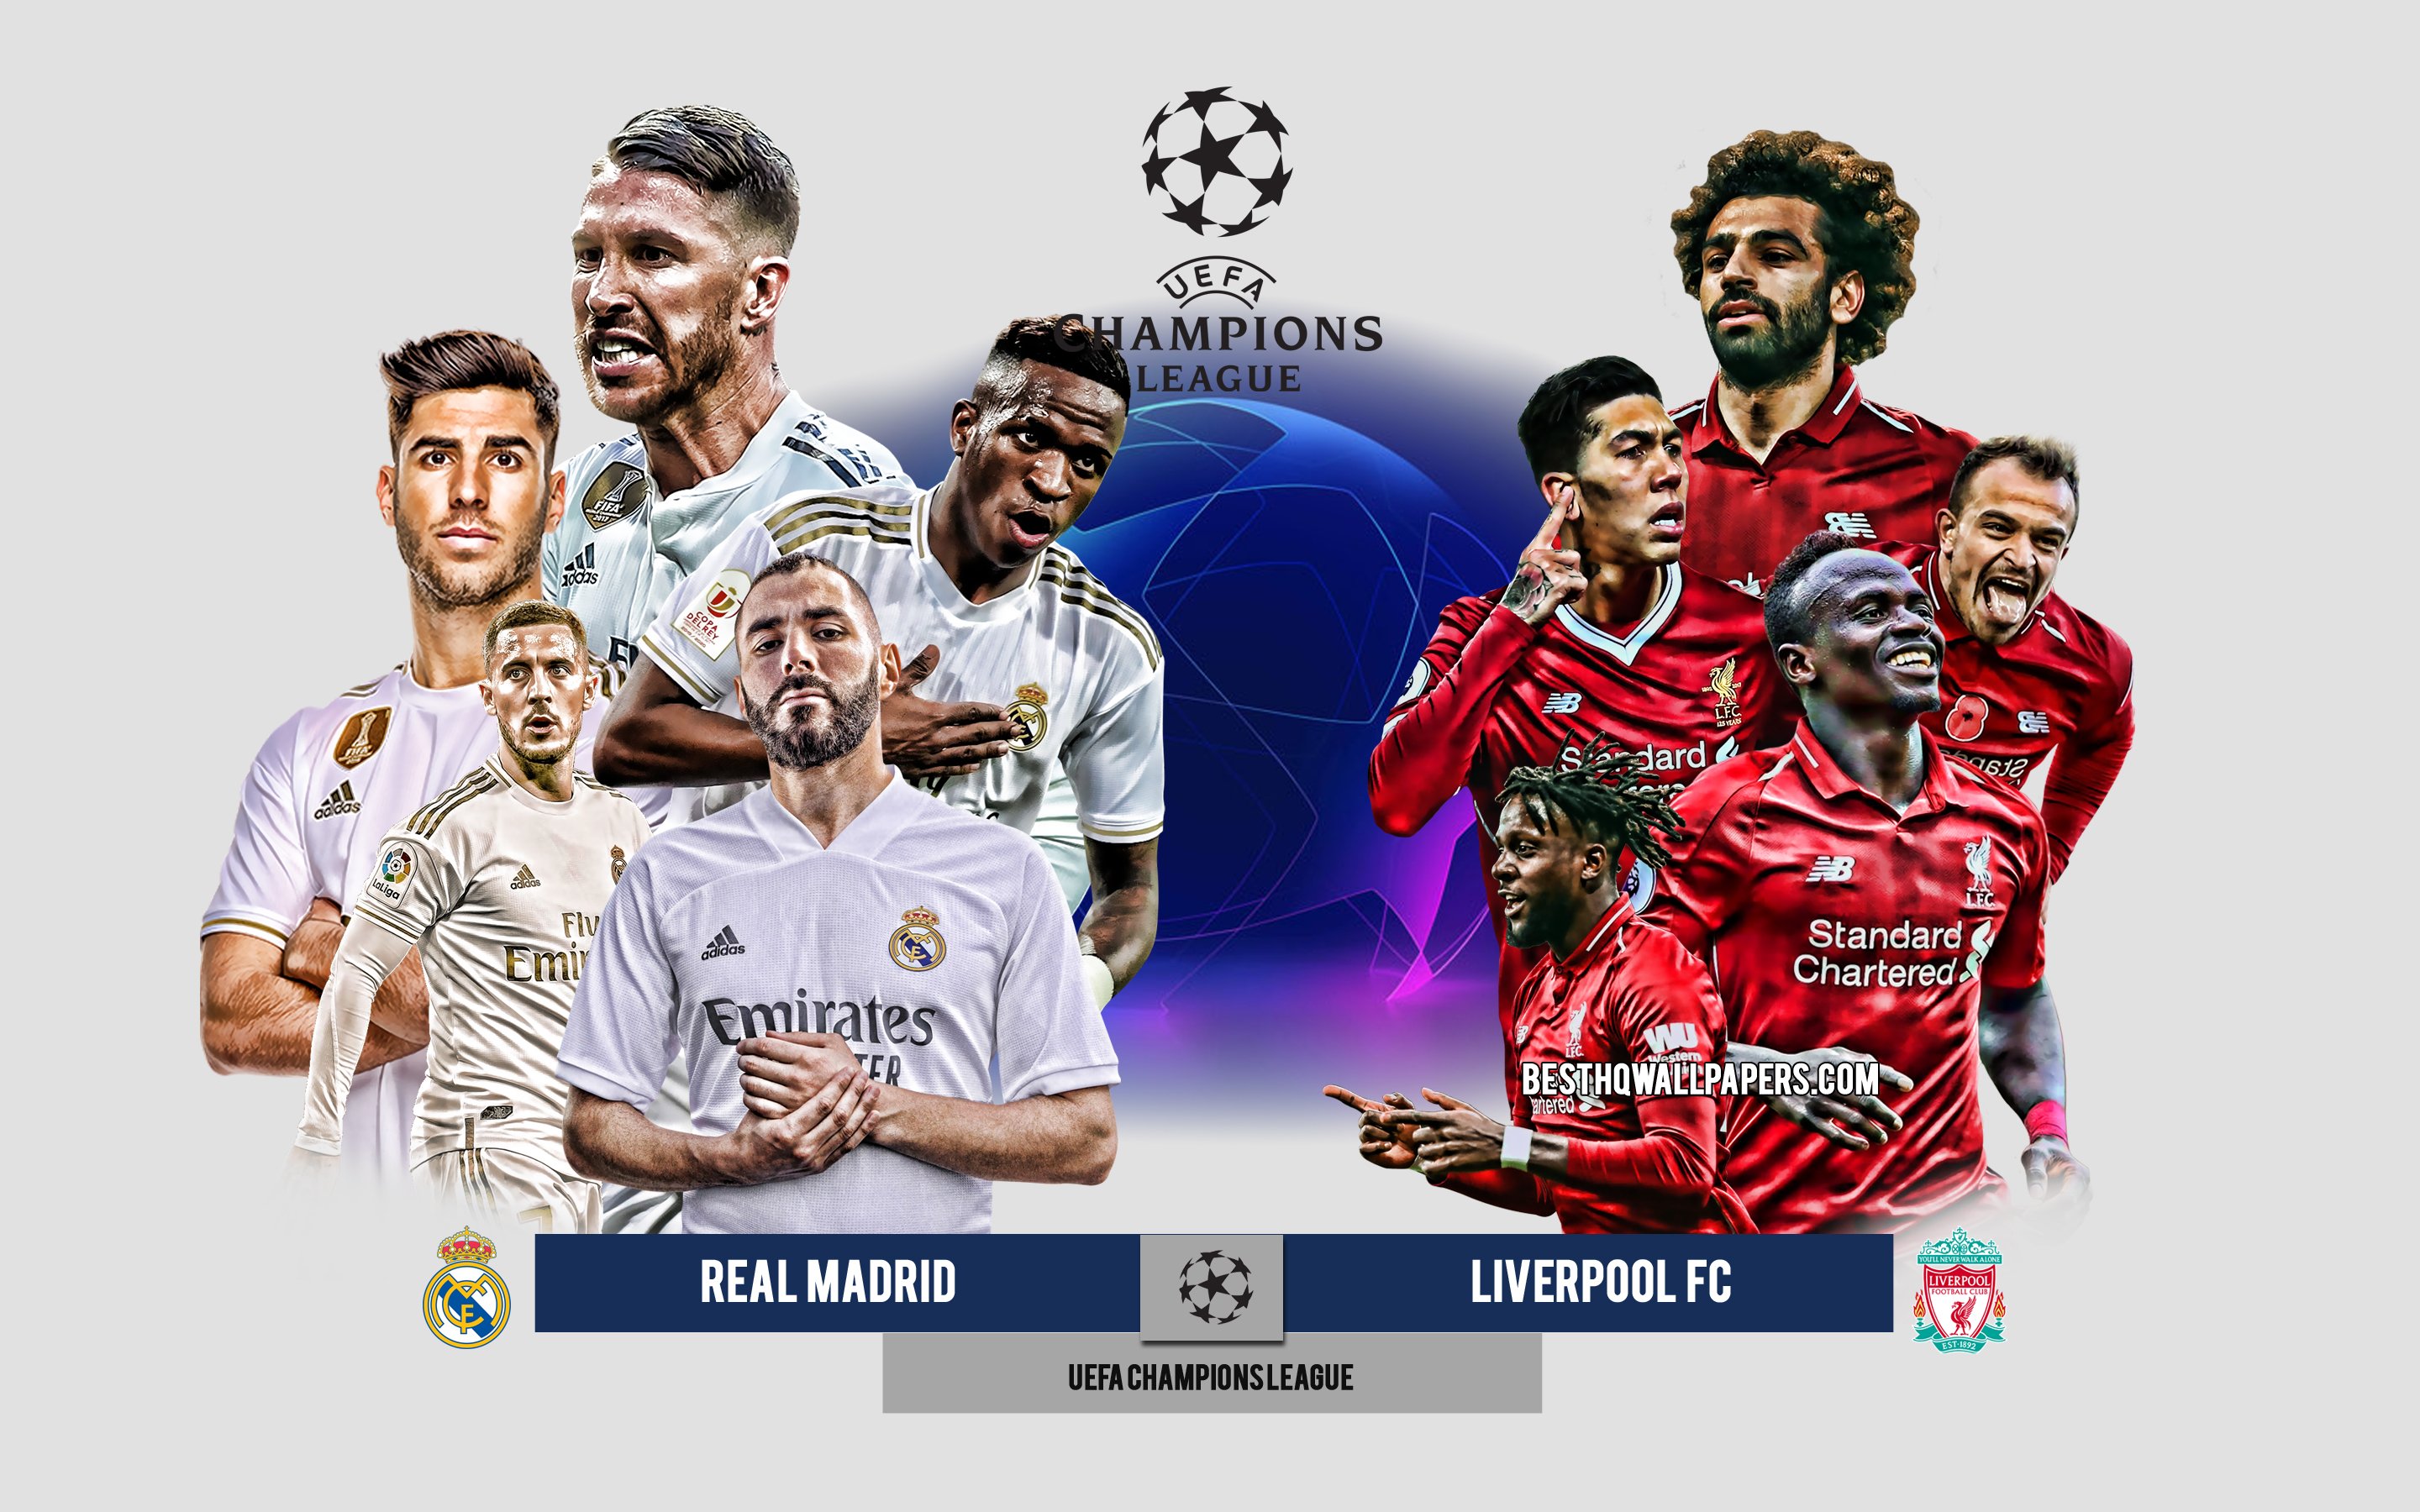 Download wallpaper Real Madrid vs Liverpool FC, quarterfinals, UEFA Champions League, Preview, promotional materials, football players, Champions League, football match, Real Madrid, Liverpool FC for desktop with resolution 2880x1800. High Quality HD